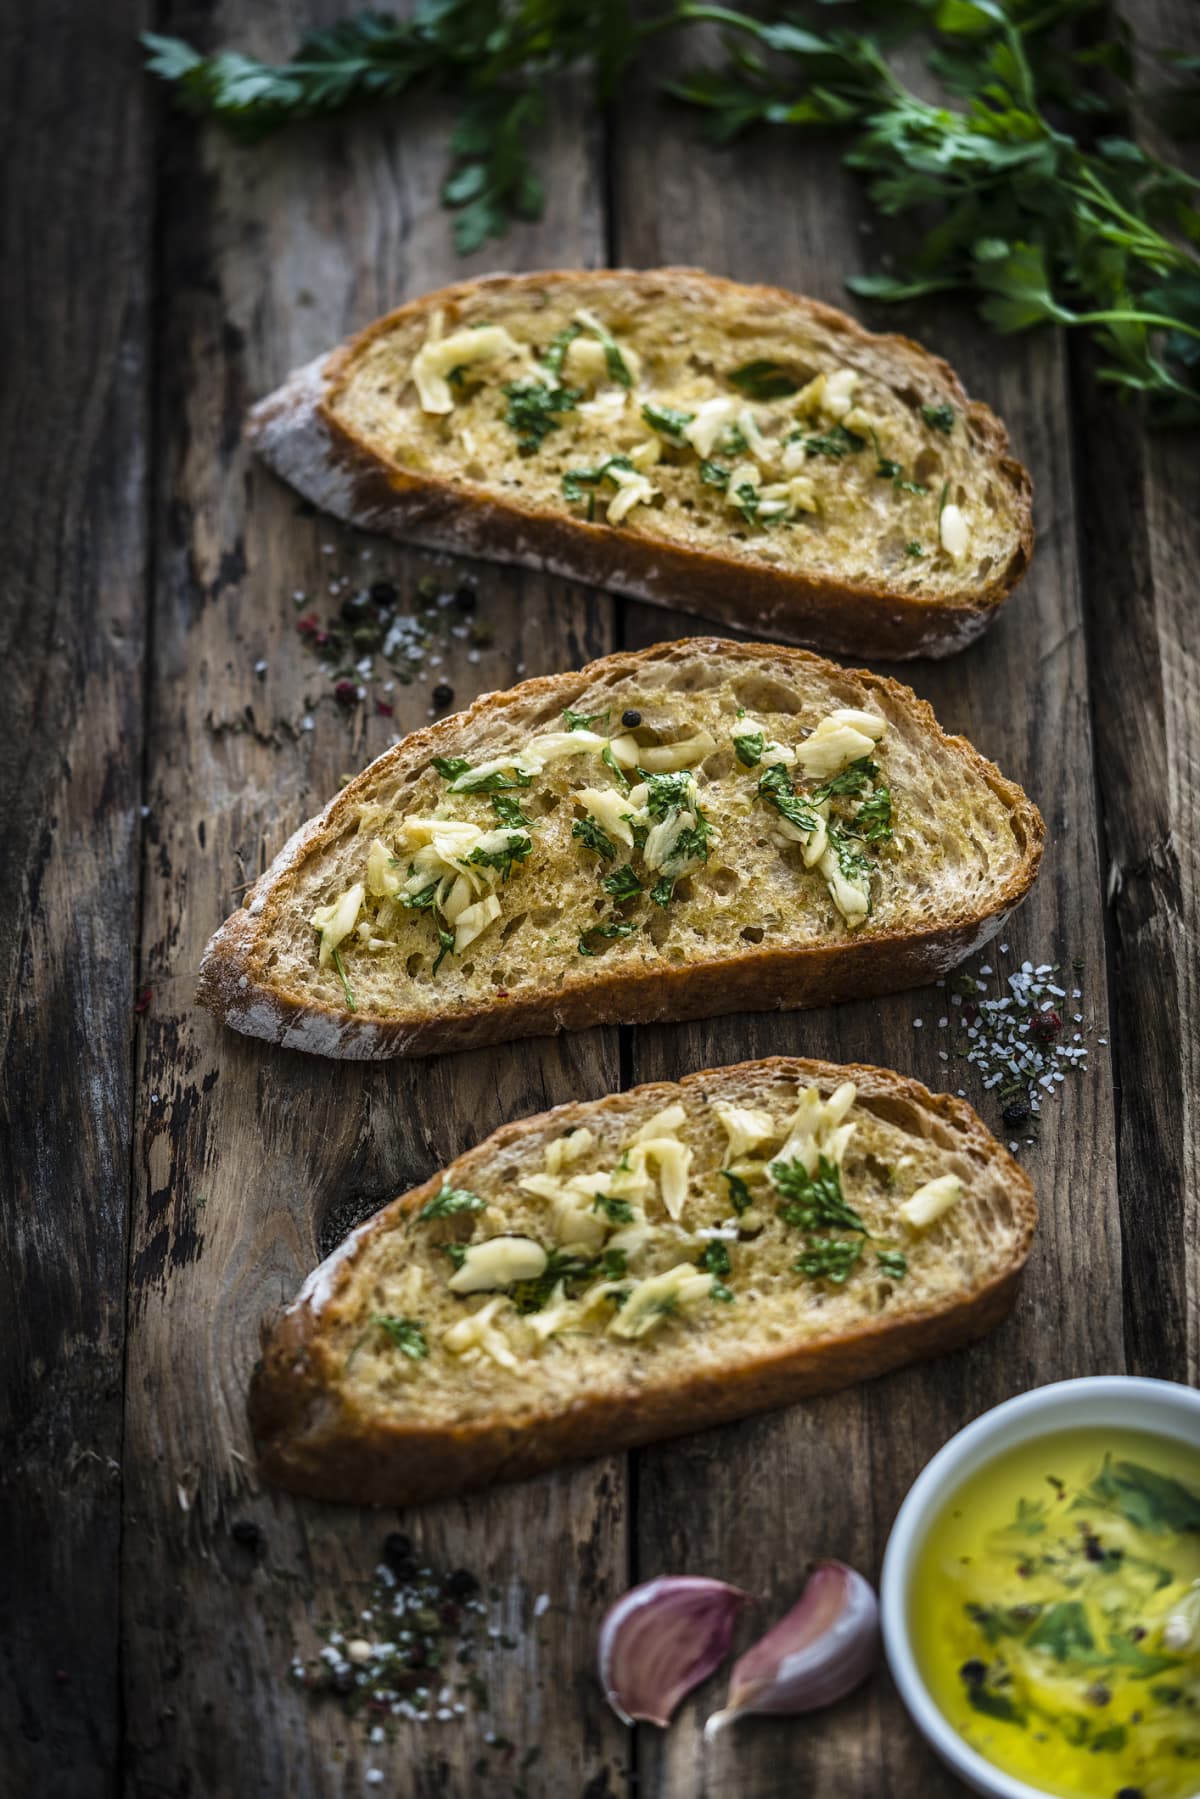 Appetizer: garlic bread on rustic wooden table. Three toasted bread slices with garlic and parsley on rustic wooden table. Parsley bunch, garlic cloves and olive oil complete the composition. Predominant colors are yellow and brown. XXXL 42Mp studio photo taken with SONY A7rII and Zeiss Batis 40mm F2.0 CF